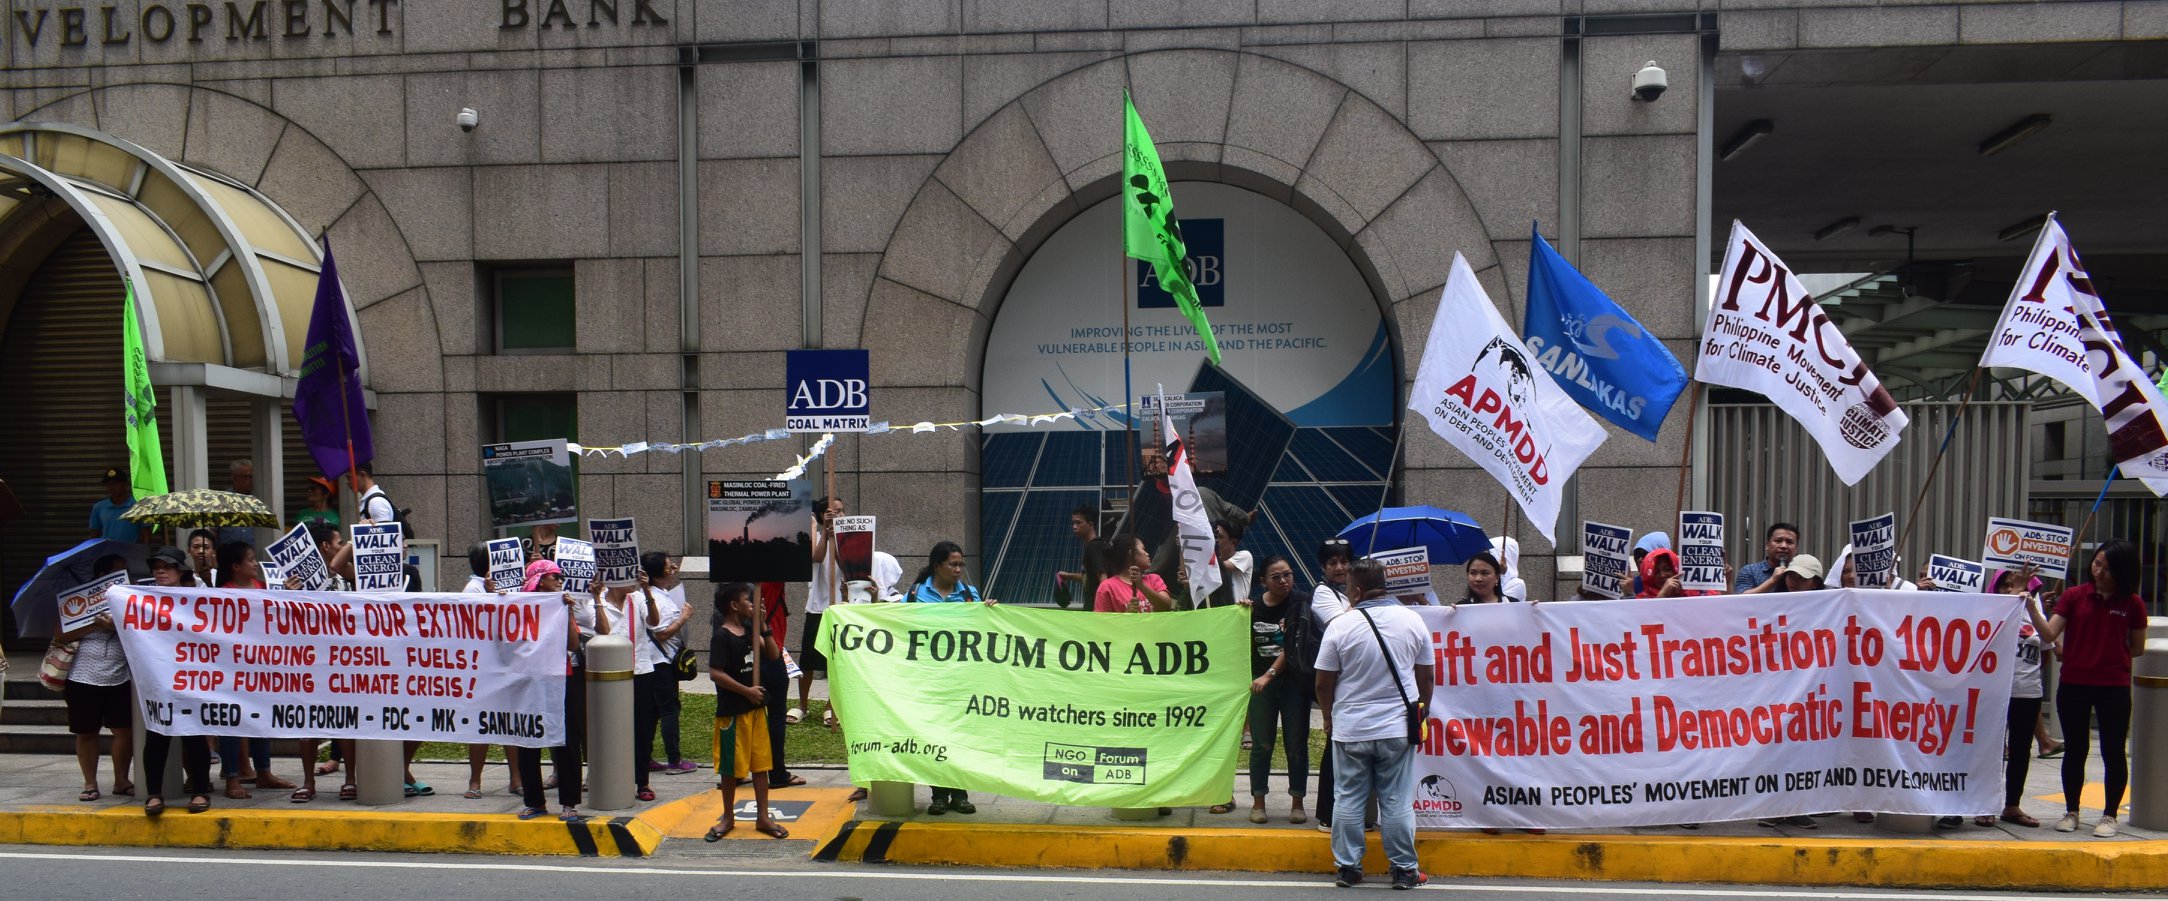 protest at ADB about coal projects